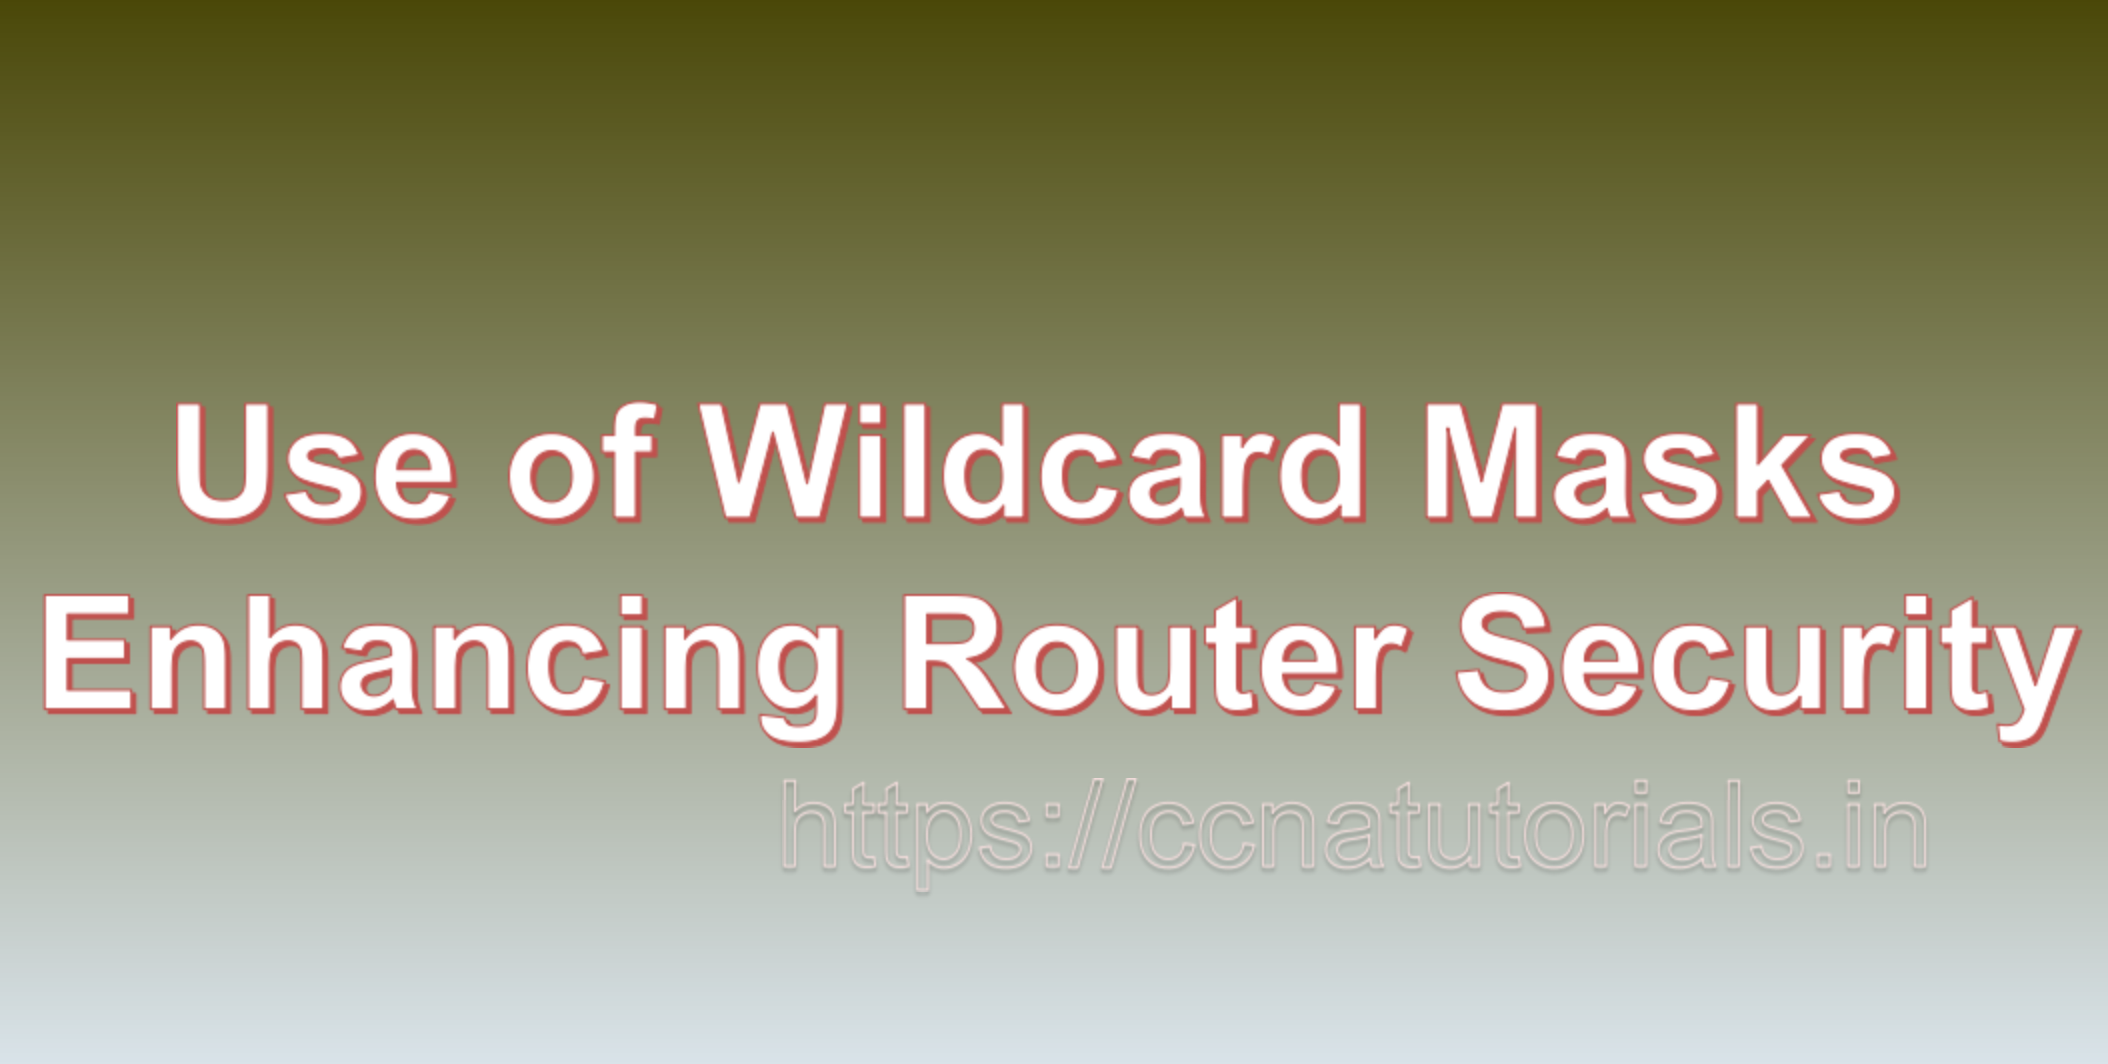 Use of Wildcard Masks Enhancing Router Security, ccna, ccna tutorials